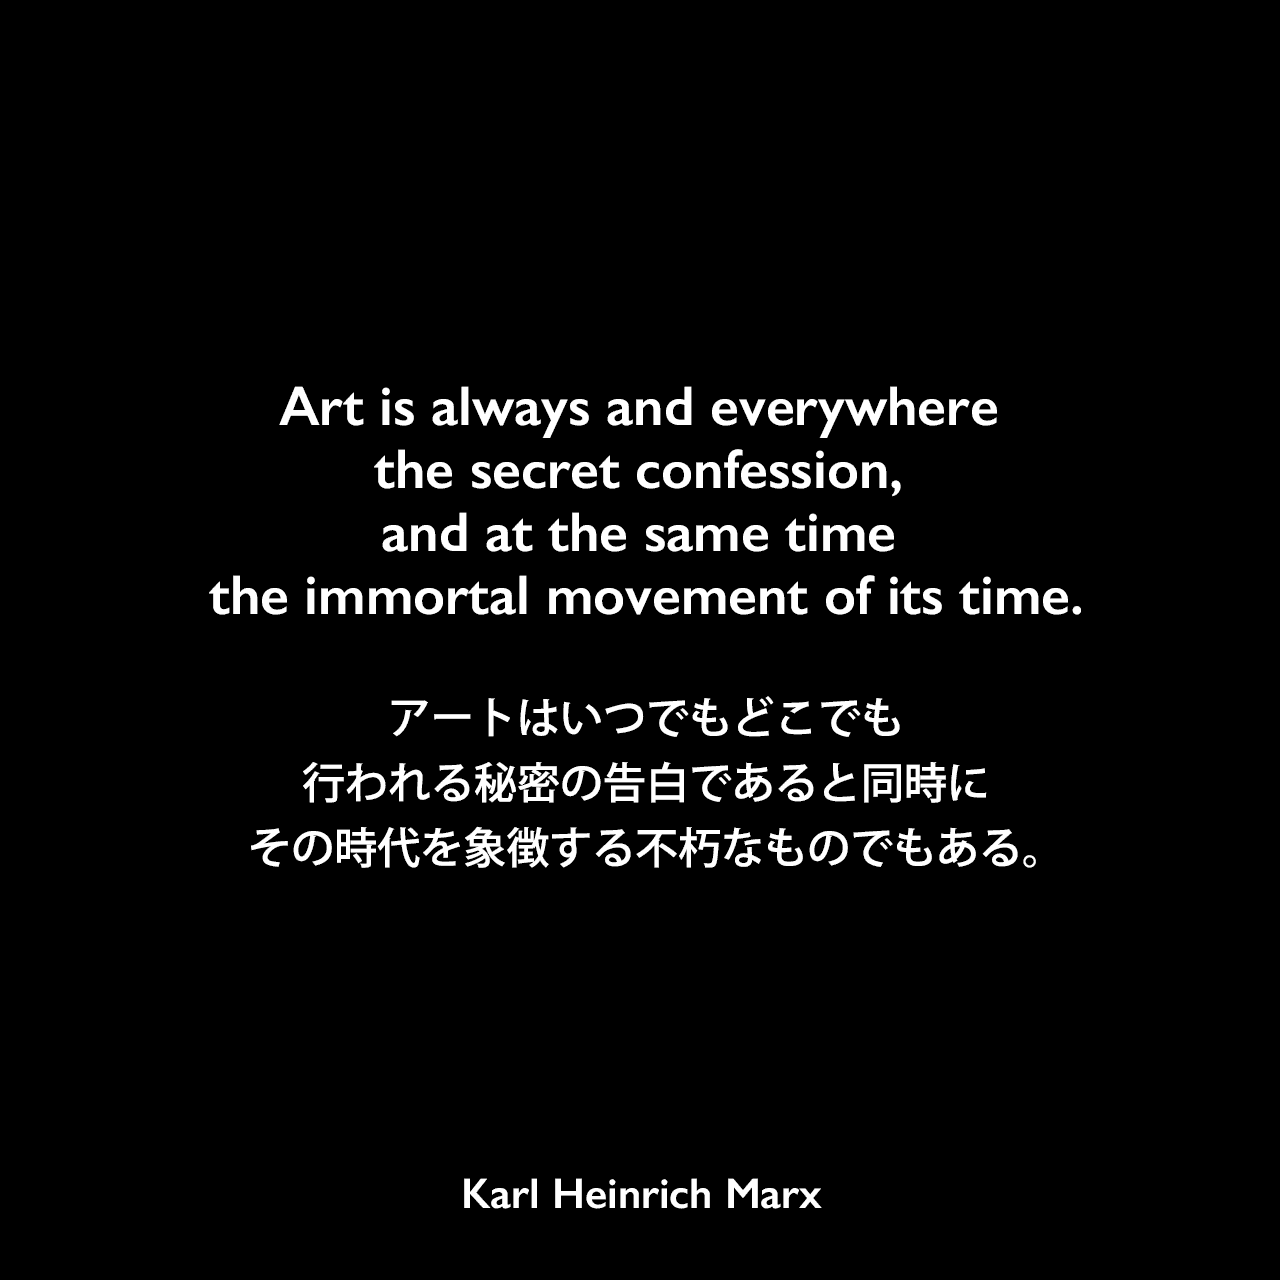 Art is always and everywhere the secret confession, and at the same time the immortal movement of its time.アートはいつでもどこでも行われる秘密の告白であると同時にその時代を象徴する不朽なものでもある。Karl Heinrich Marx